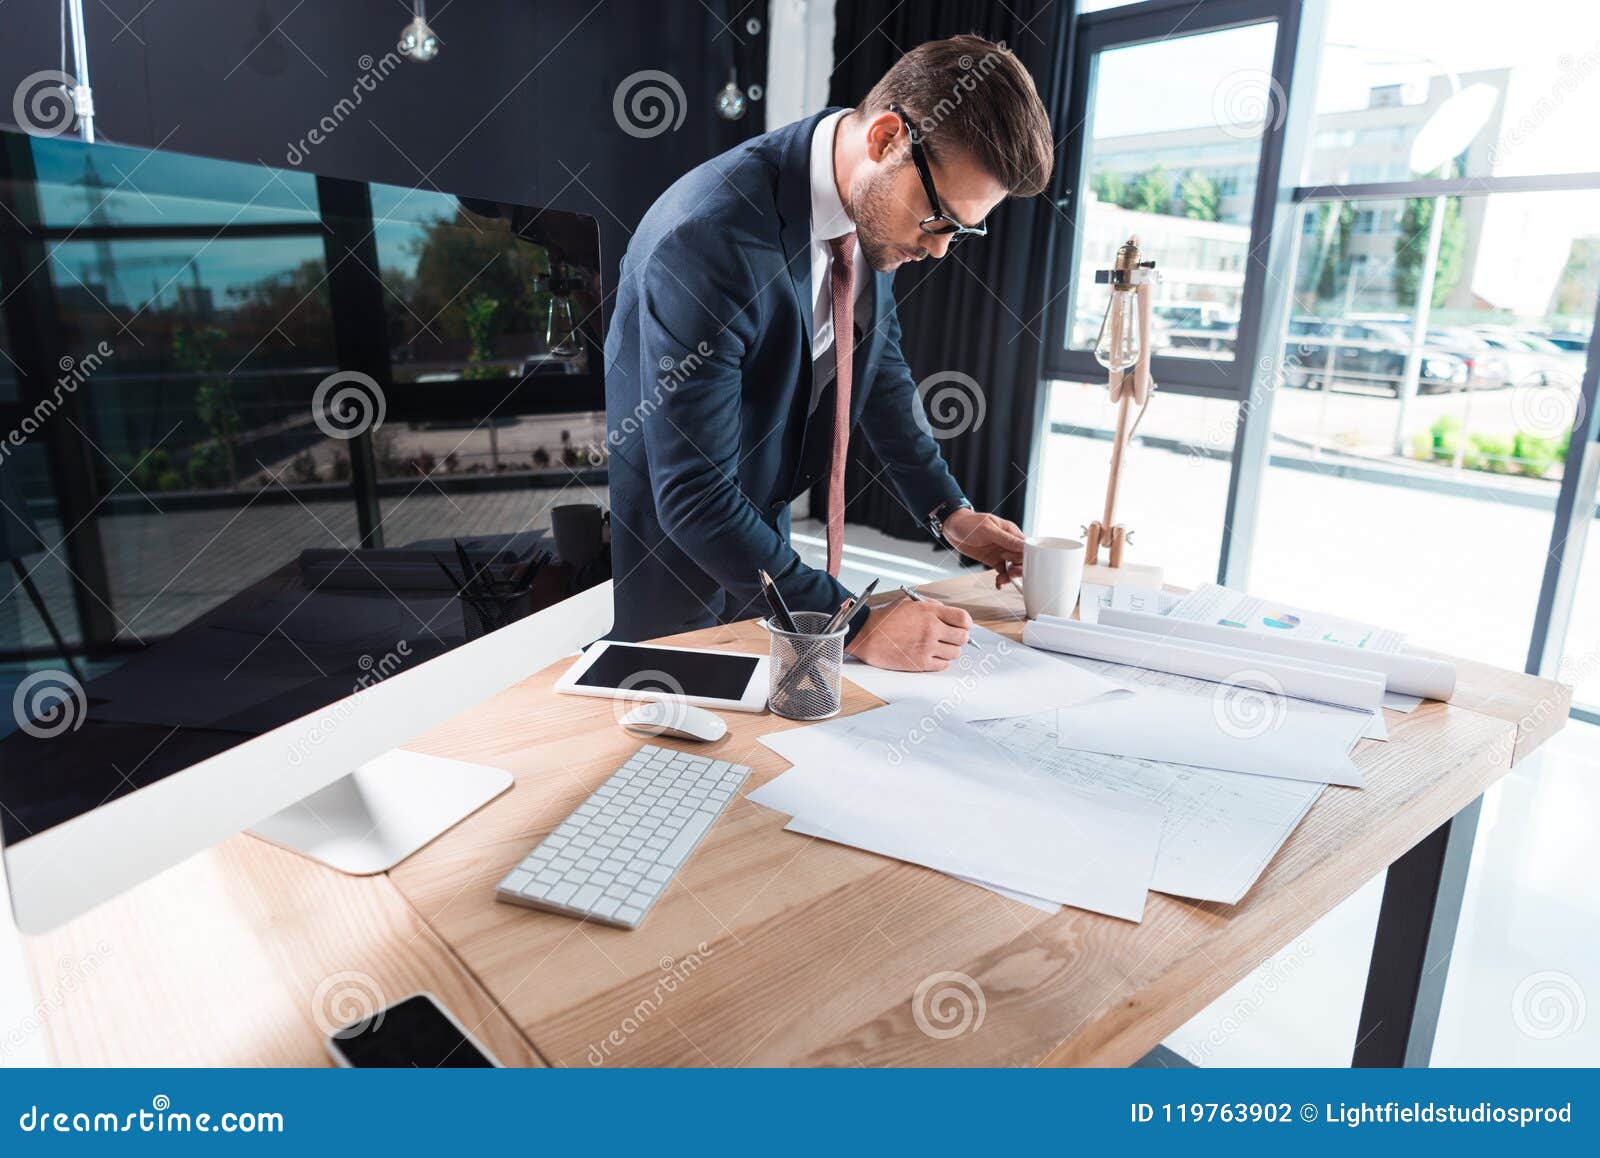 focused young businessman in eyeglasses working with papers